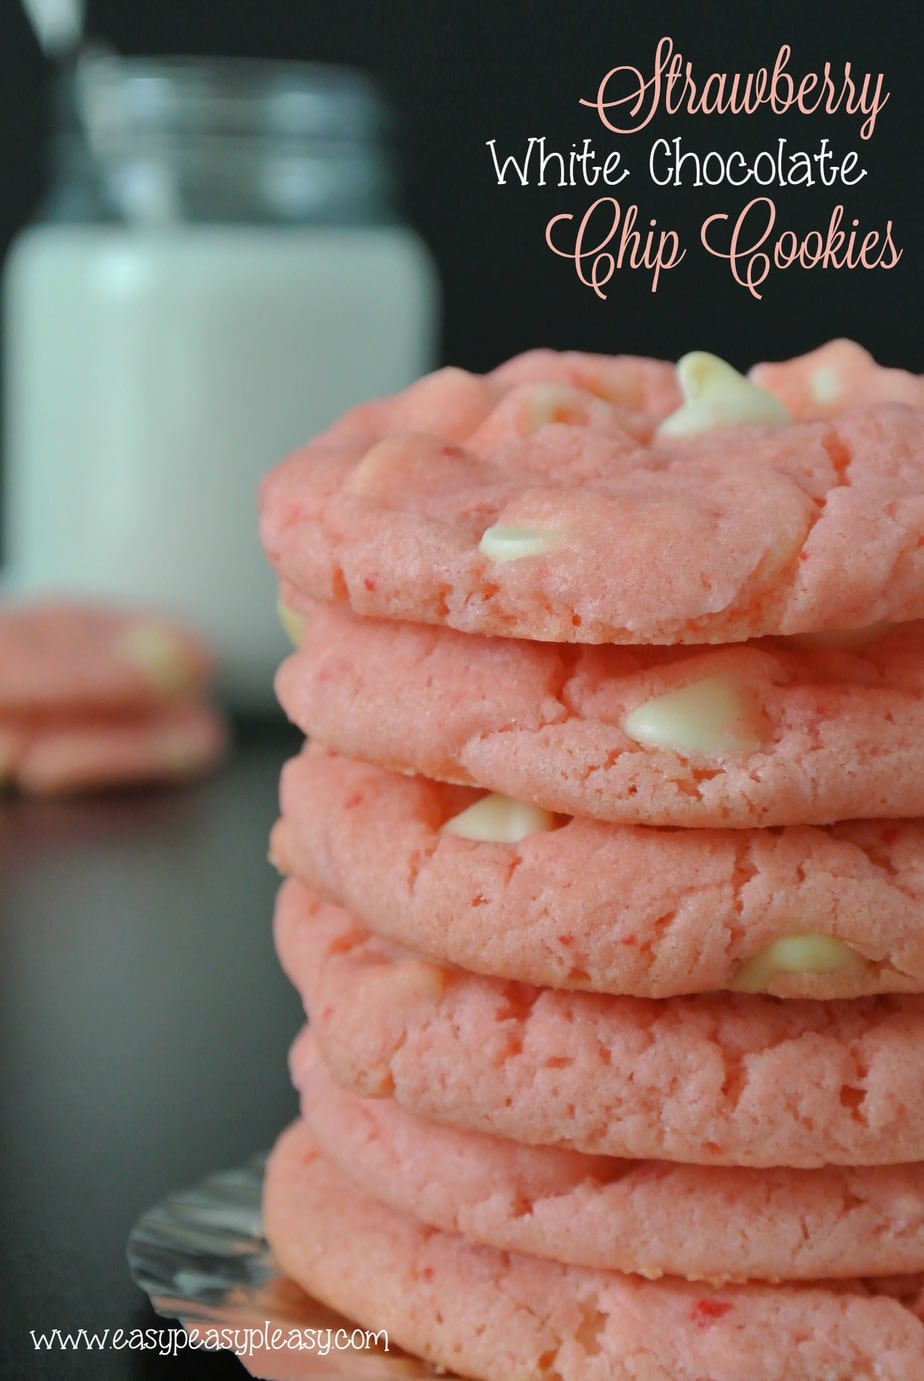 Do you want to see how easy these 4 Ingredient Strawberry White Chocolate Chip Cookies really are? They are oh so scrumptious! Perfect for Valentine's Day or any other day!